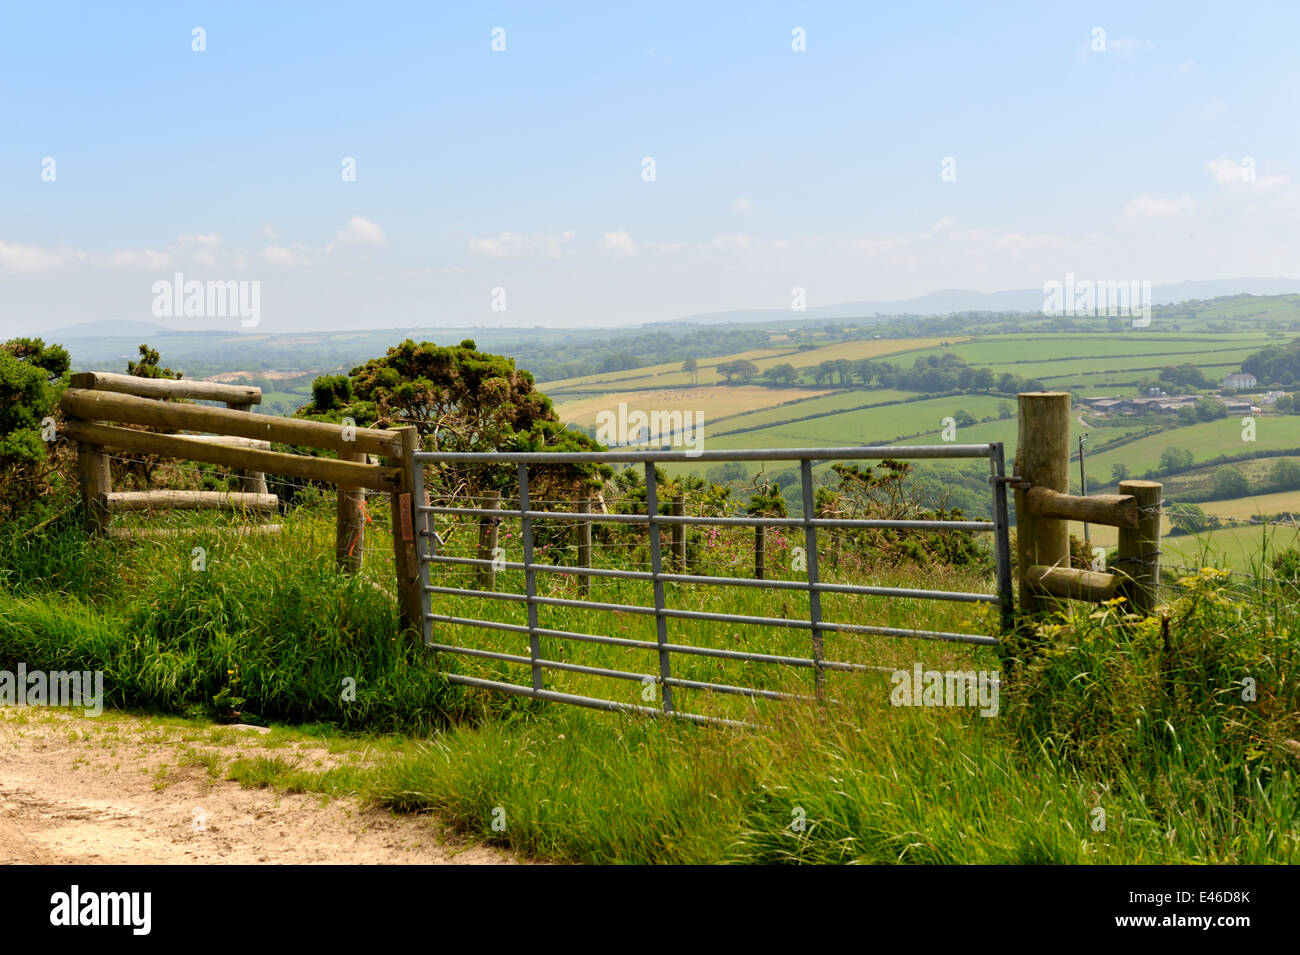 Farm field gate with hazy patchwork of hedgerow bound fields in distance, Wales, UK Stock Photo